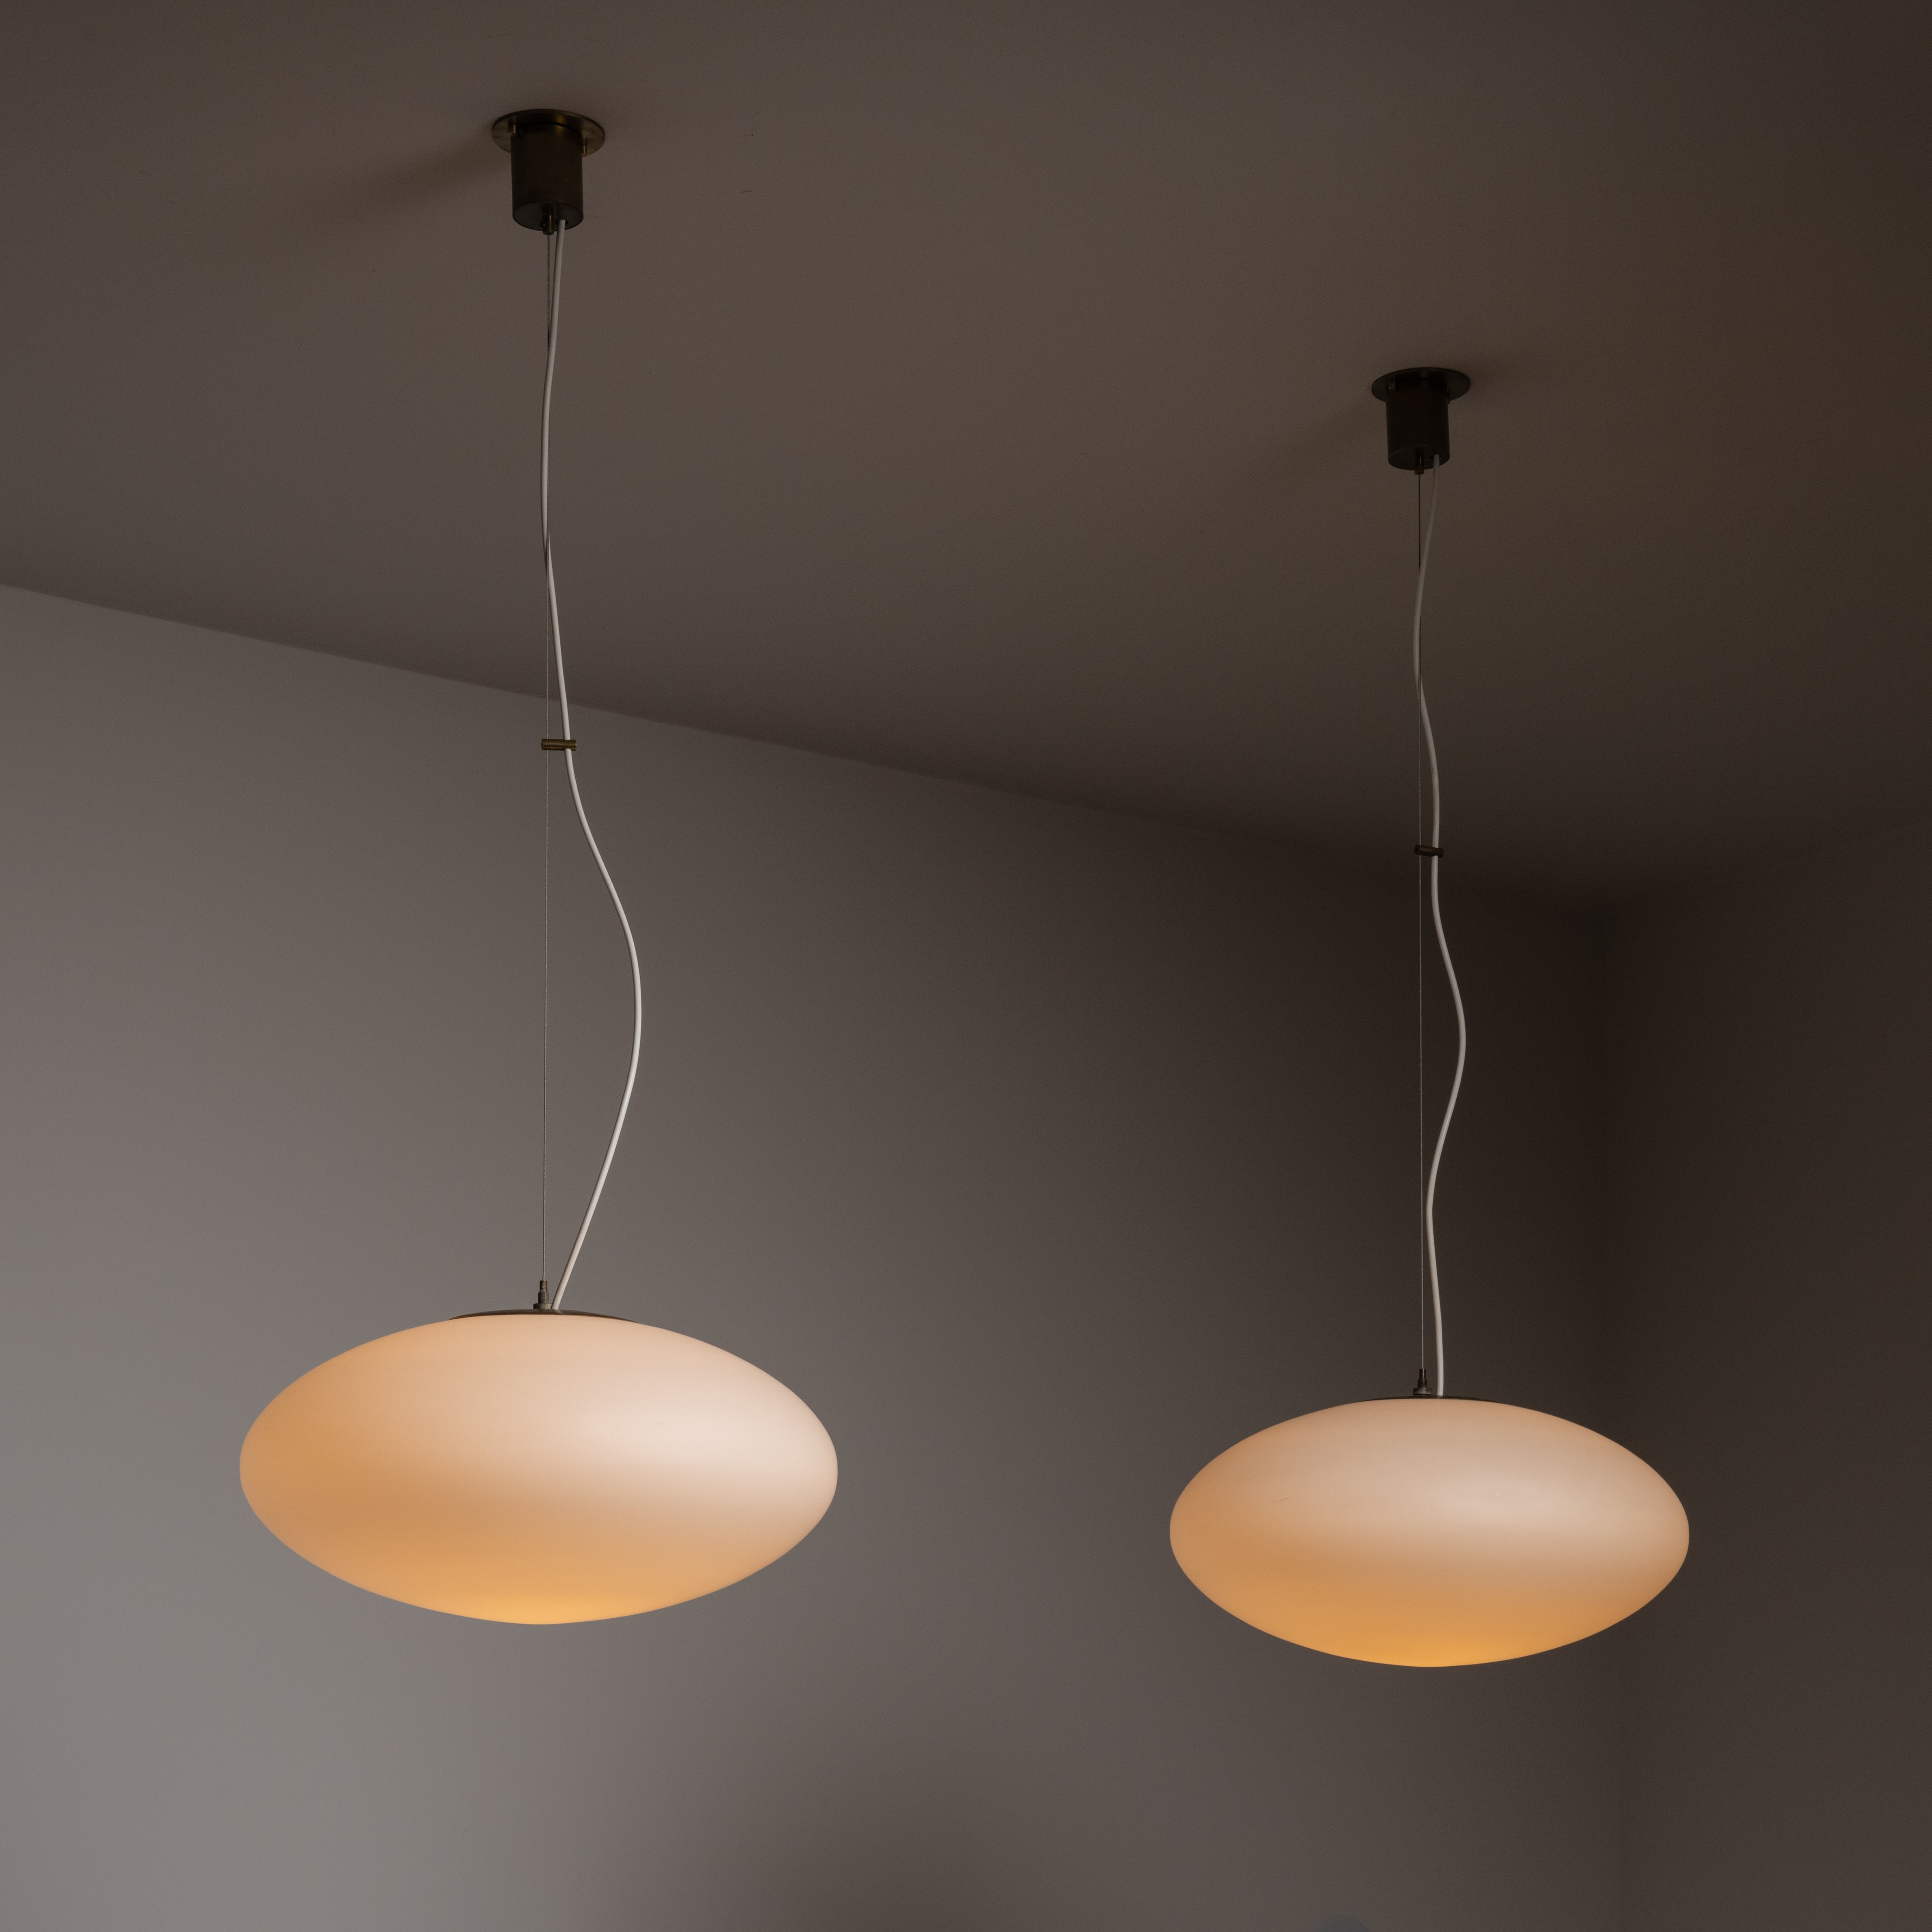 Single Model 1187 Ceiling Lamp by Gaetano Sciolari for Stilnovo. Designed and manufactured in Italy, circa the 1970s. Opaline glass orbs suspended by steel cable. Brass hardware and accents on the canopy. Length is slightly adjustable with wire